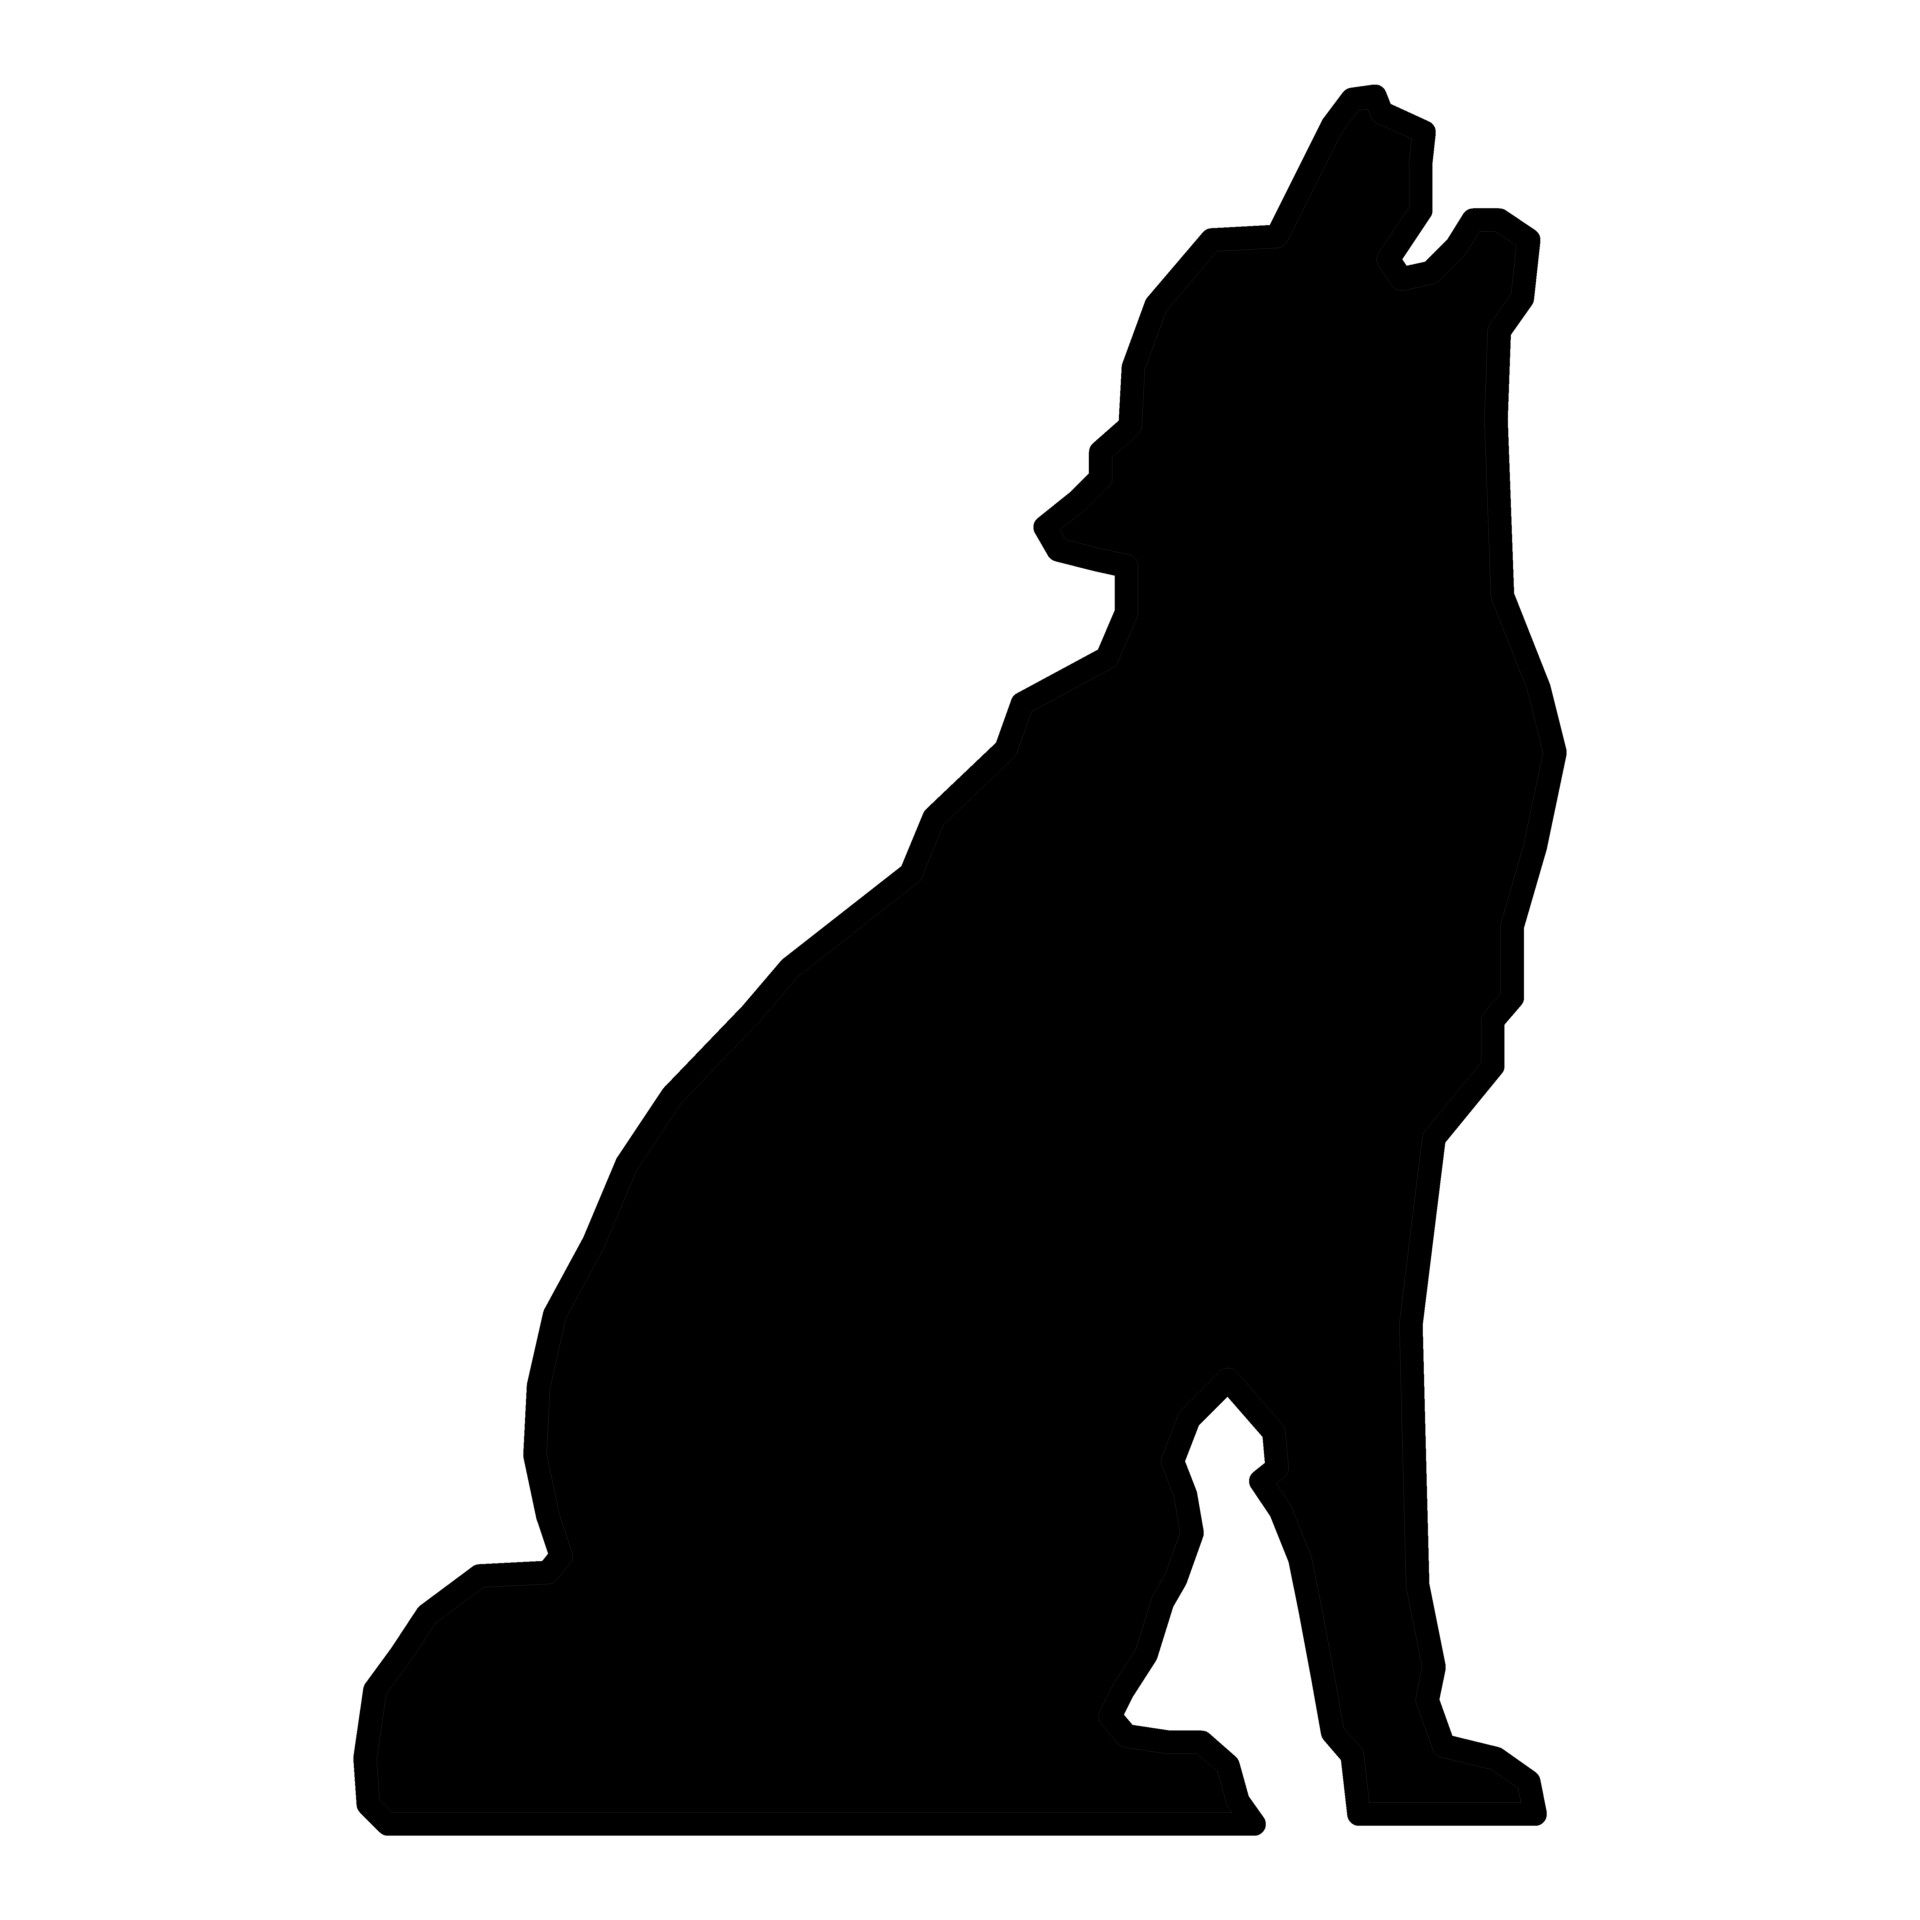 Howling Wolf Silhouette - ClipArt Best